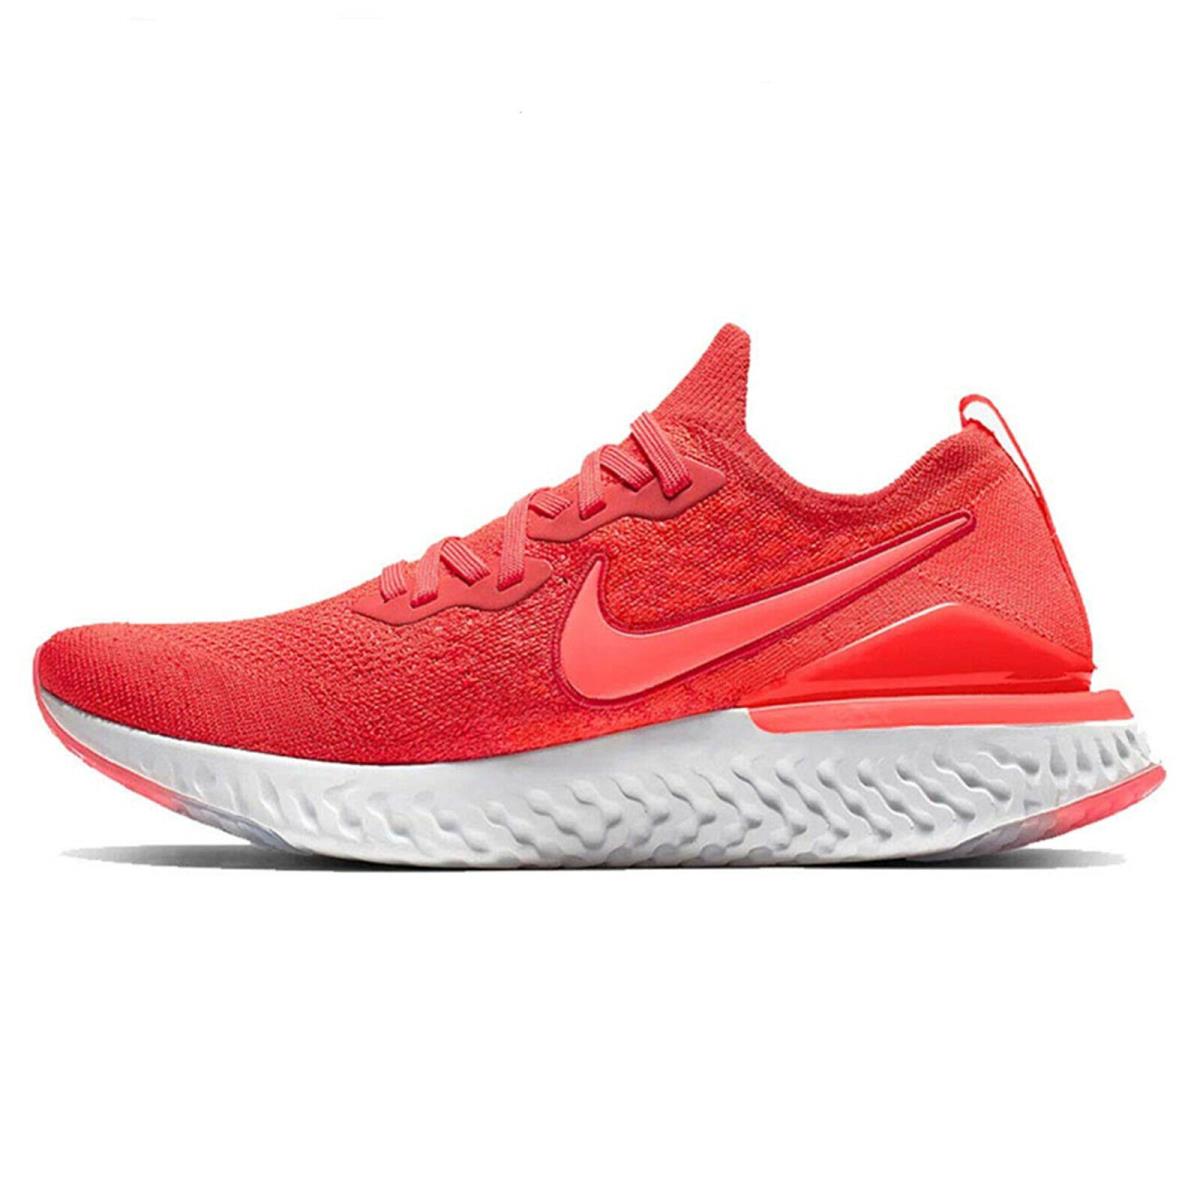 Nike shoes Epic React Flyknit - CHILI RED / BRIGHT CRIMSON , CHILI RED / BRIGHT CRIMSON Manufacturer 4